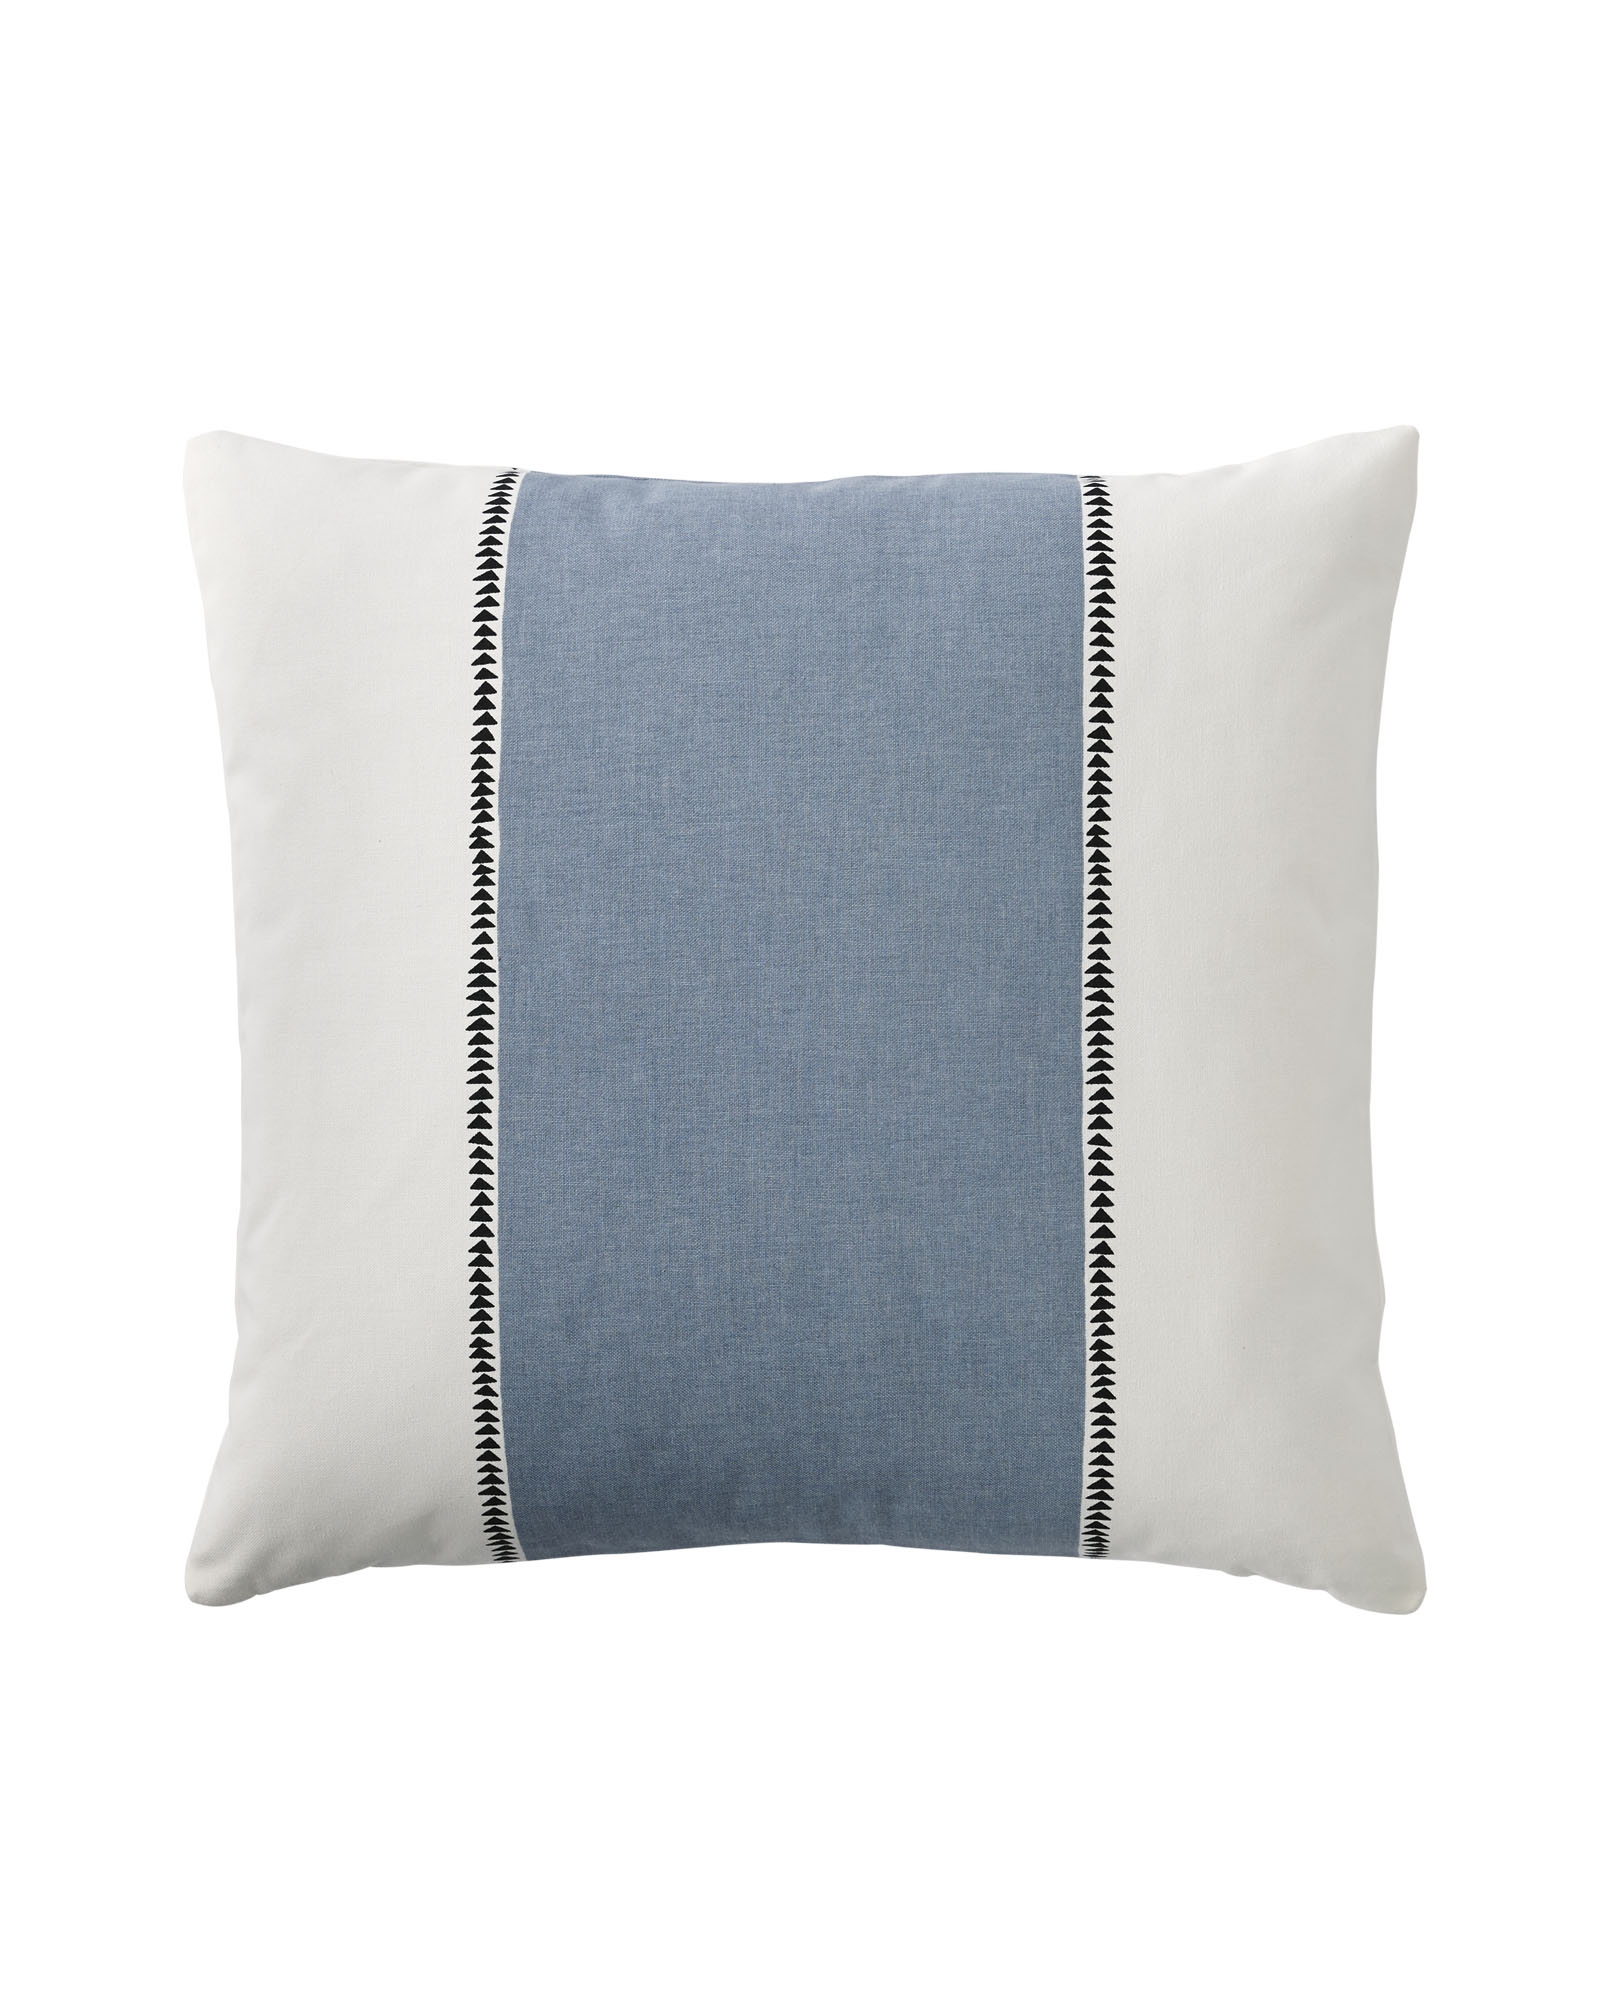 Racing Stripe Pillow Covers - Chambray - 20" x 20" - Insert Not Included - Image 0